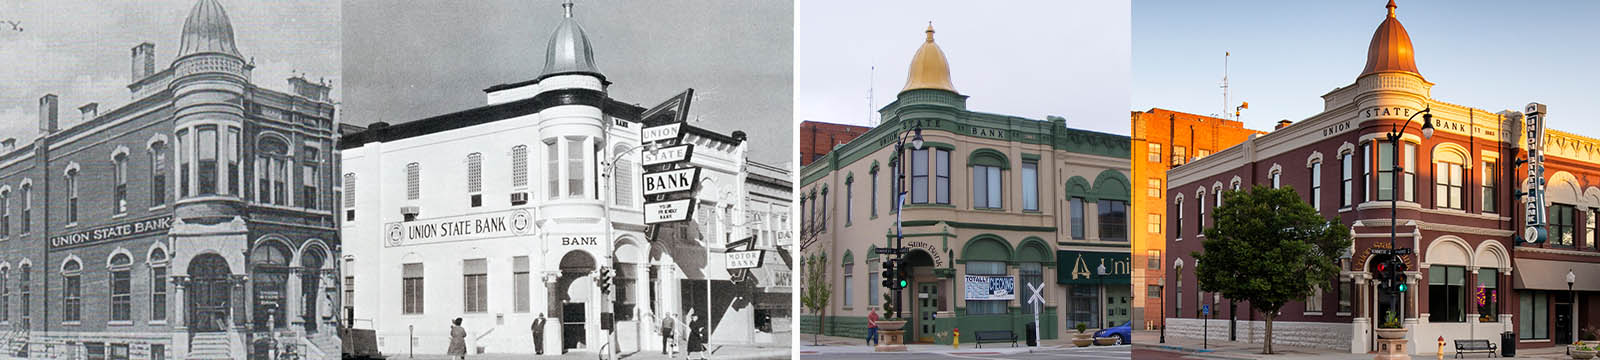 Four photos of the original Union State Building in Arkansas City KS, ranging from the early 1900's to present. 